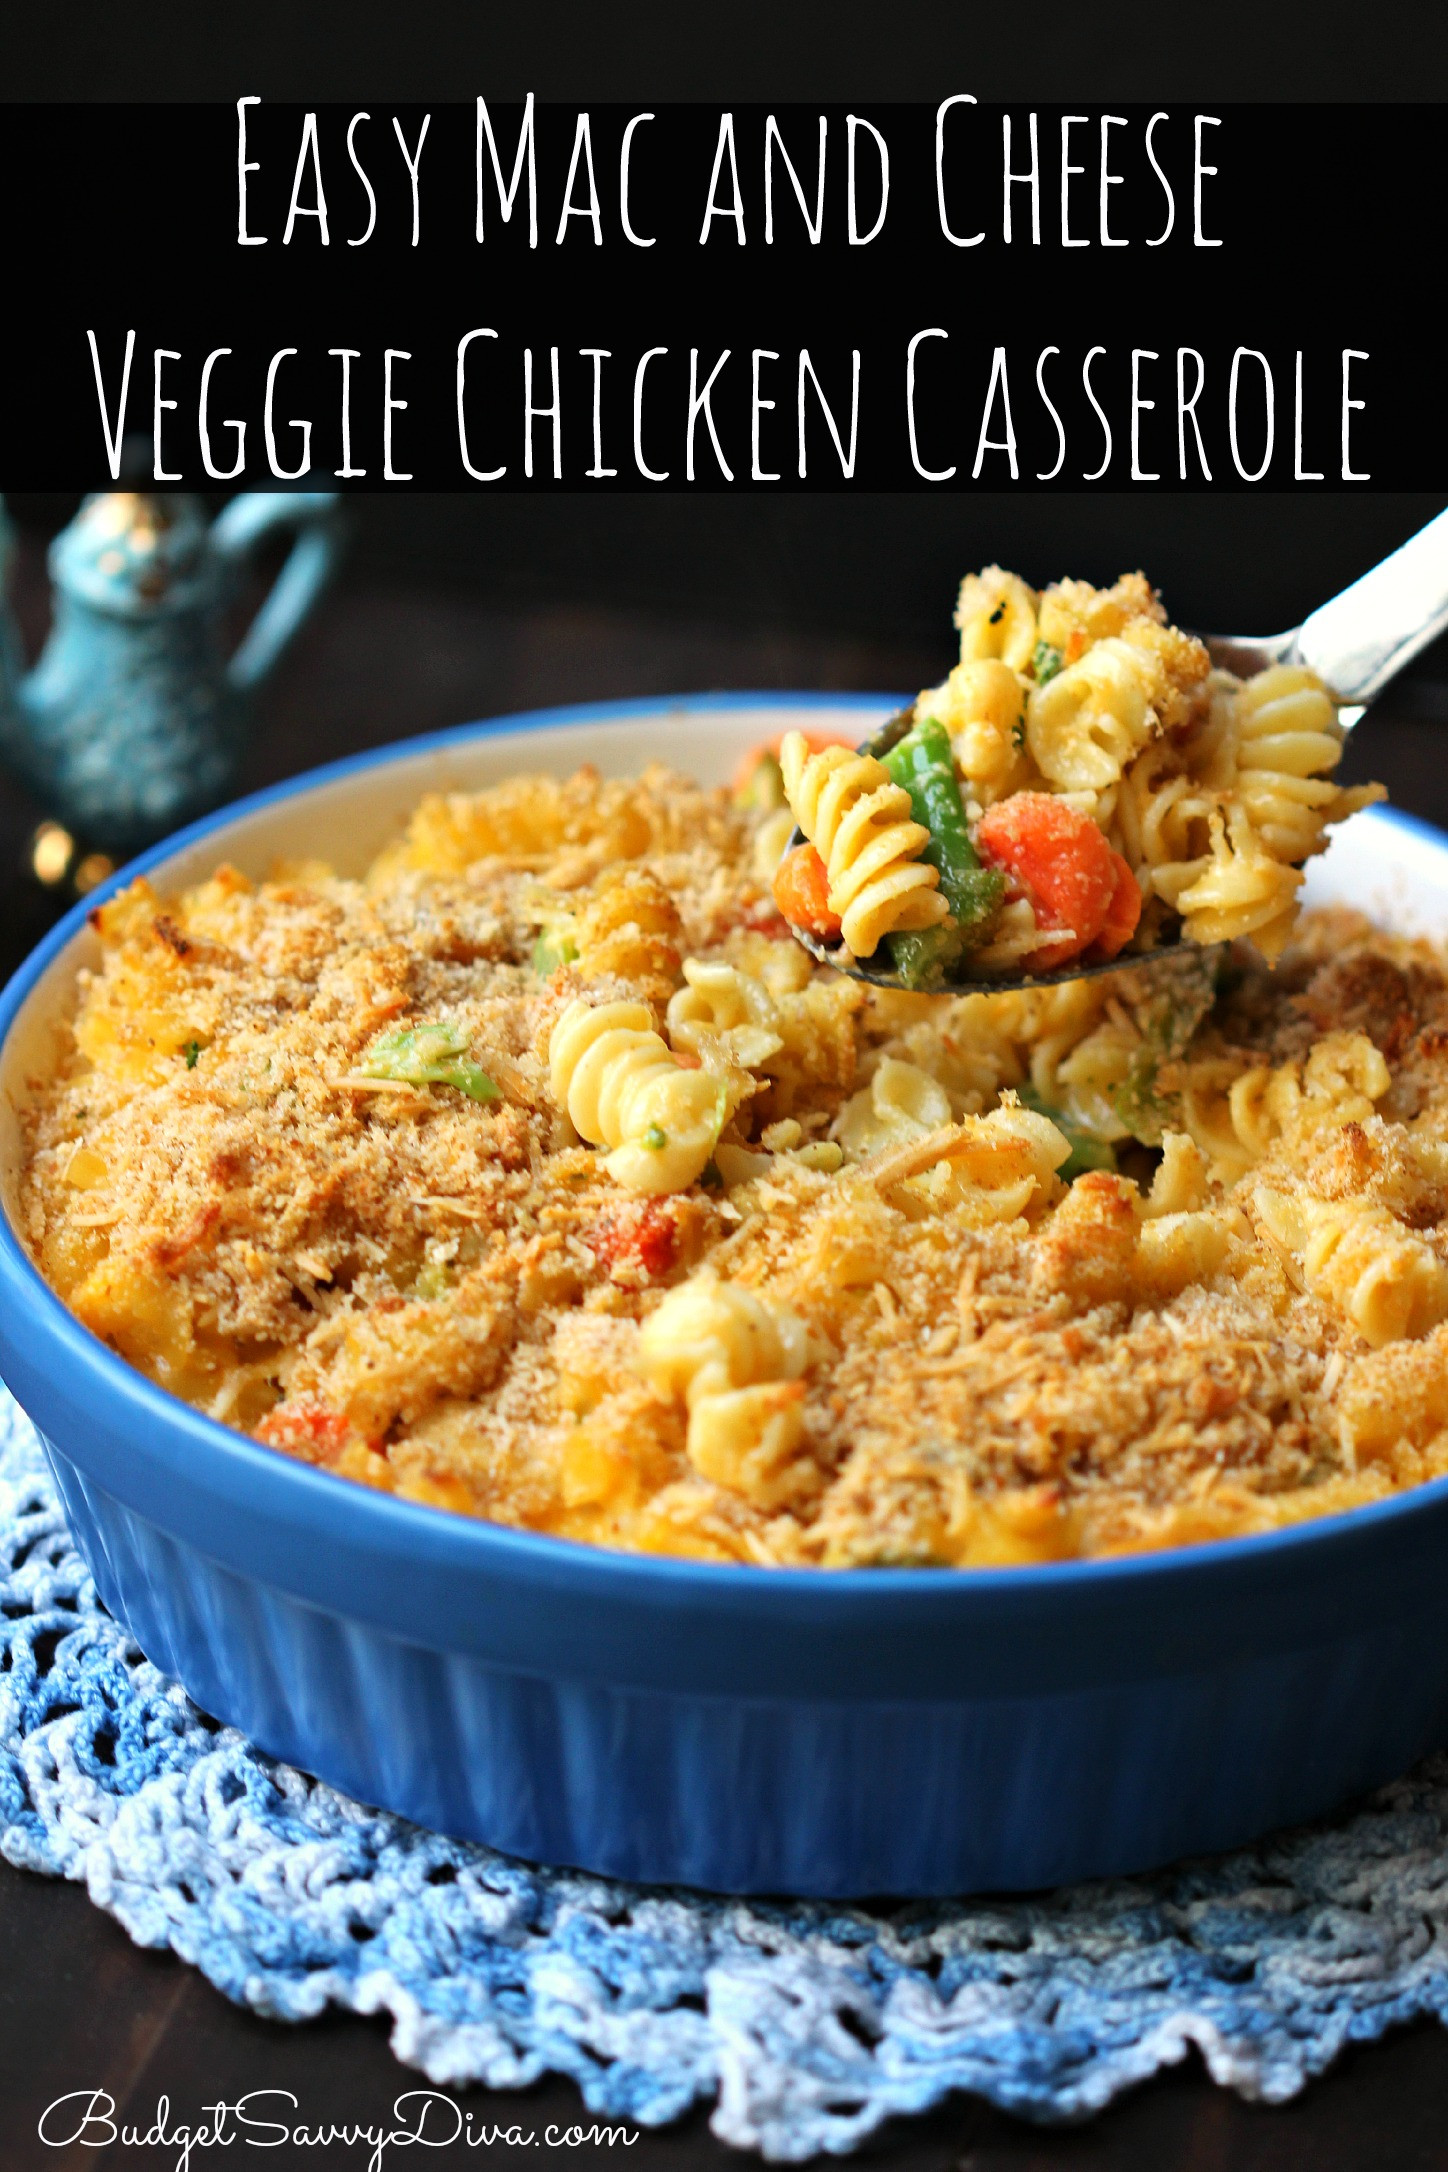 Macaroni And Cheese Casserole With Chicken
 Easy Mac and Cheese Veggie Chicken Casserole Recipe